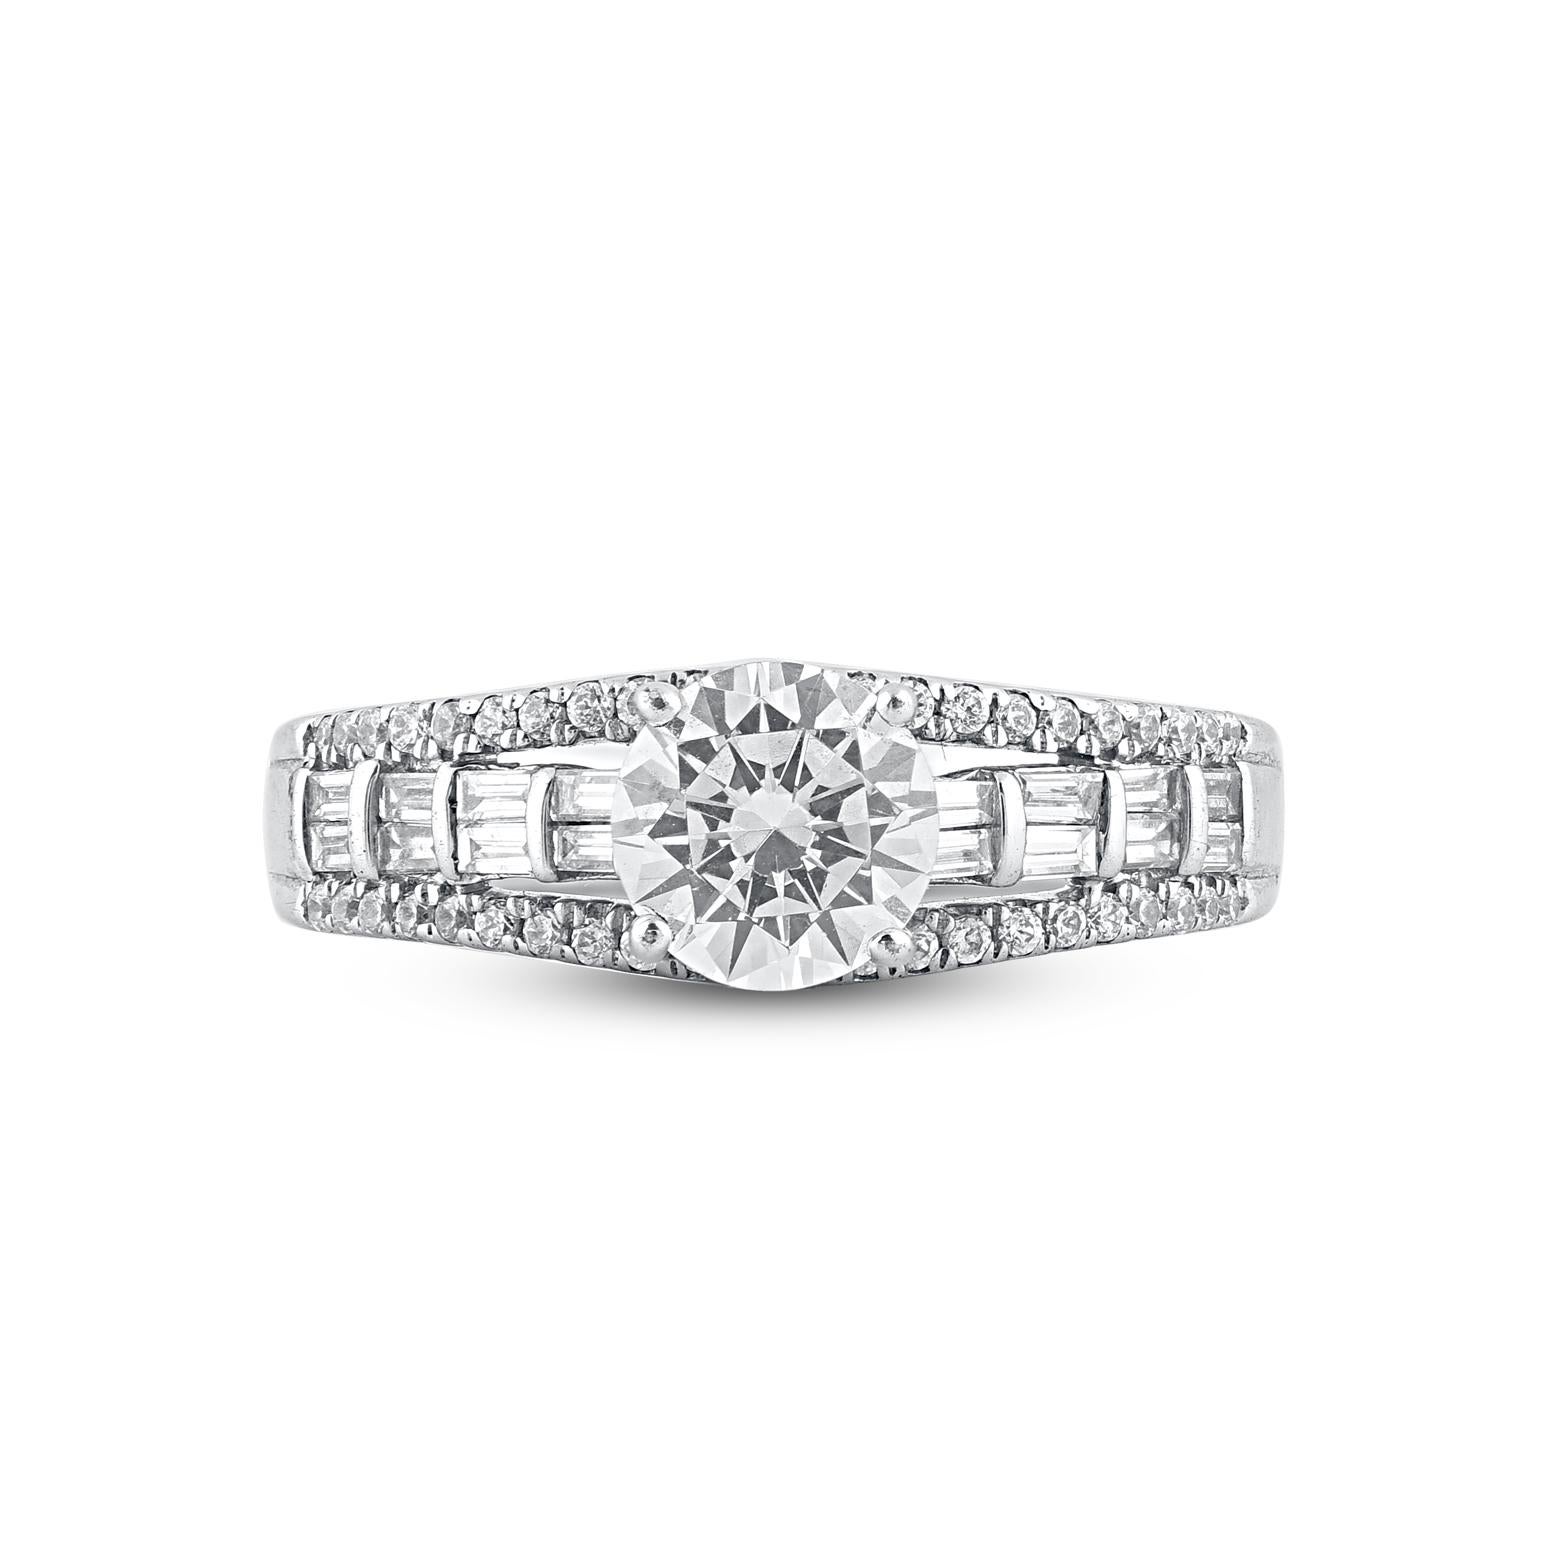 Make a big impression and seal your vows with this engagement ring. Beautifully crafted by our inhouse experts in 14 karat white gold and embellished with 61 brilliant cut, single cut round diamond and baguette cut diamonds set in prong and channel